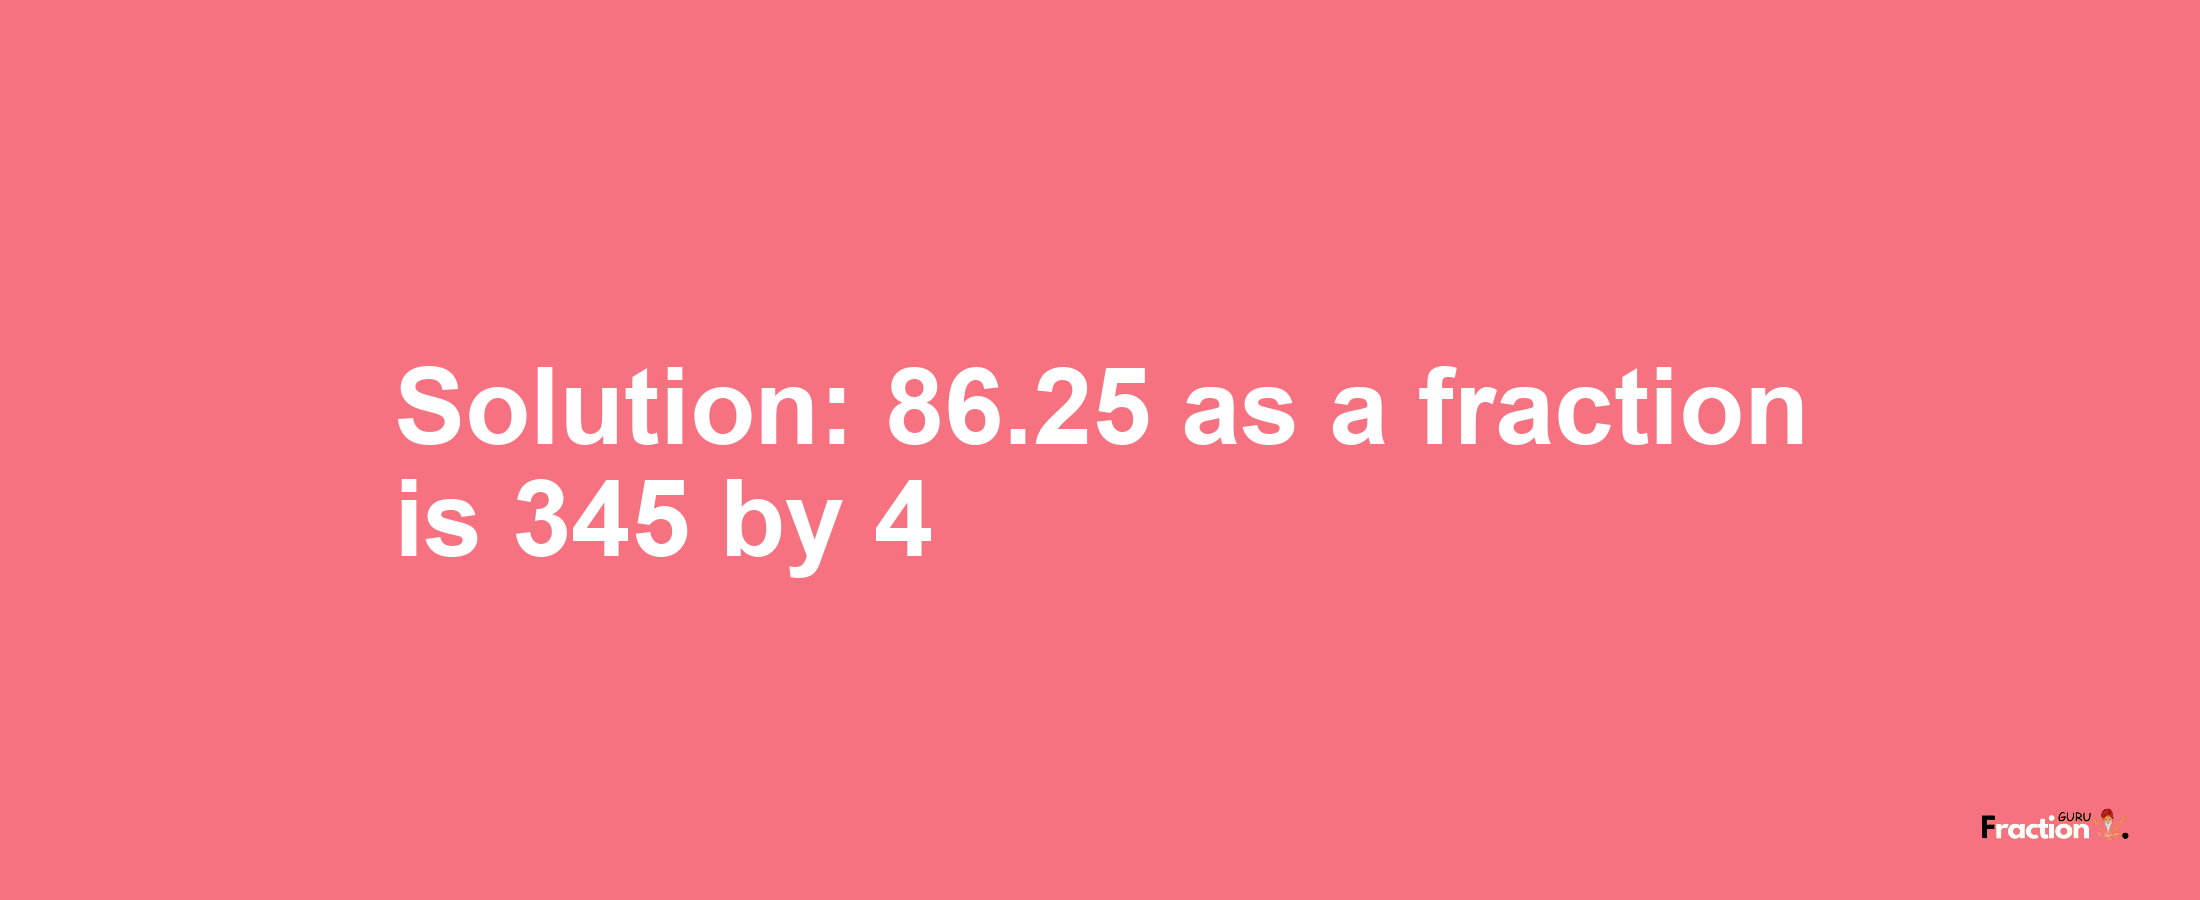 Solution:86.25 as a fraction is 345/4